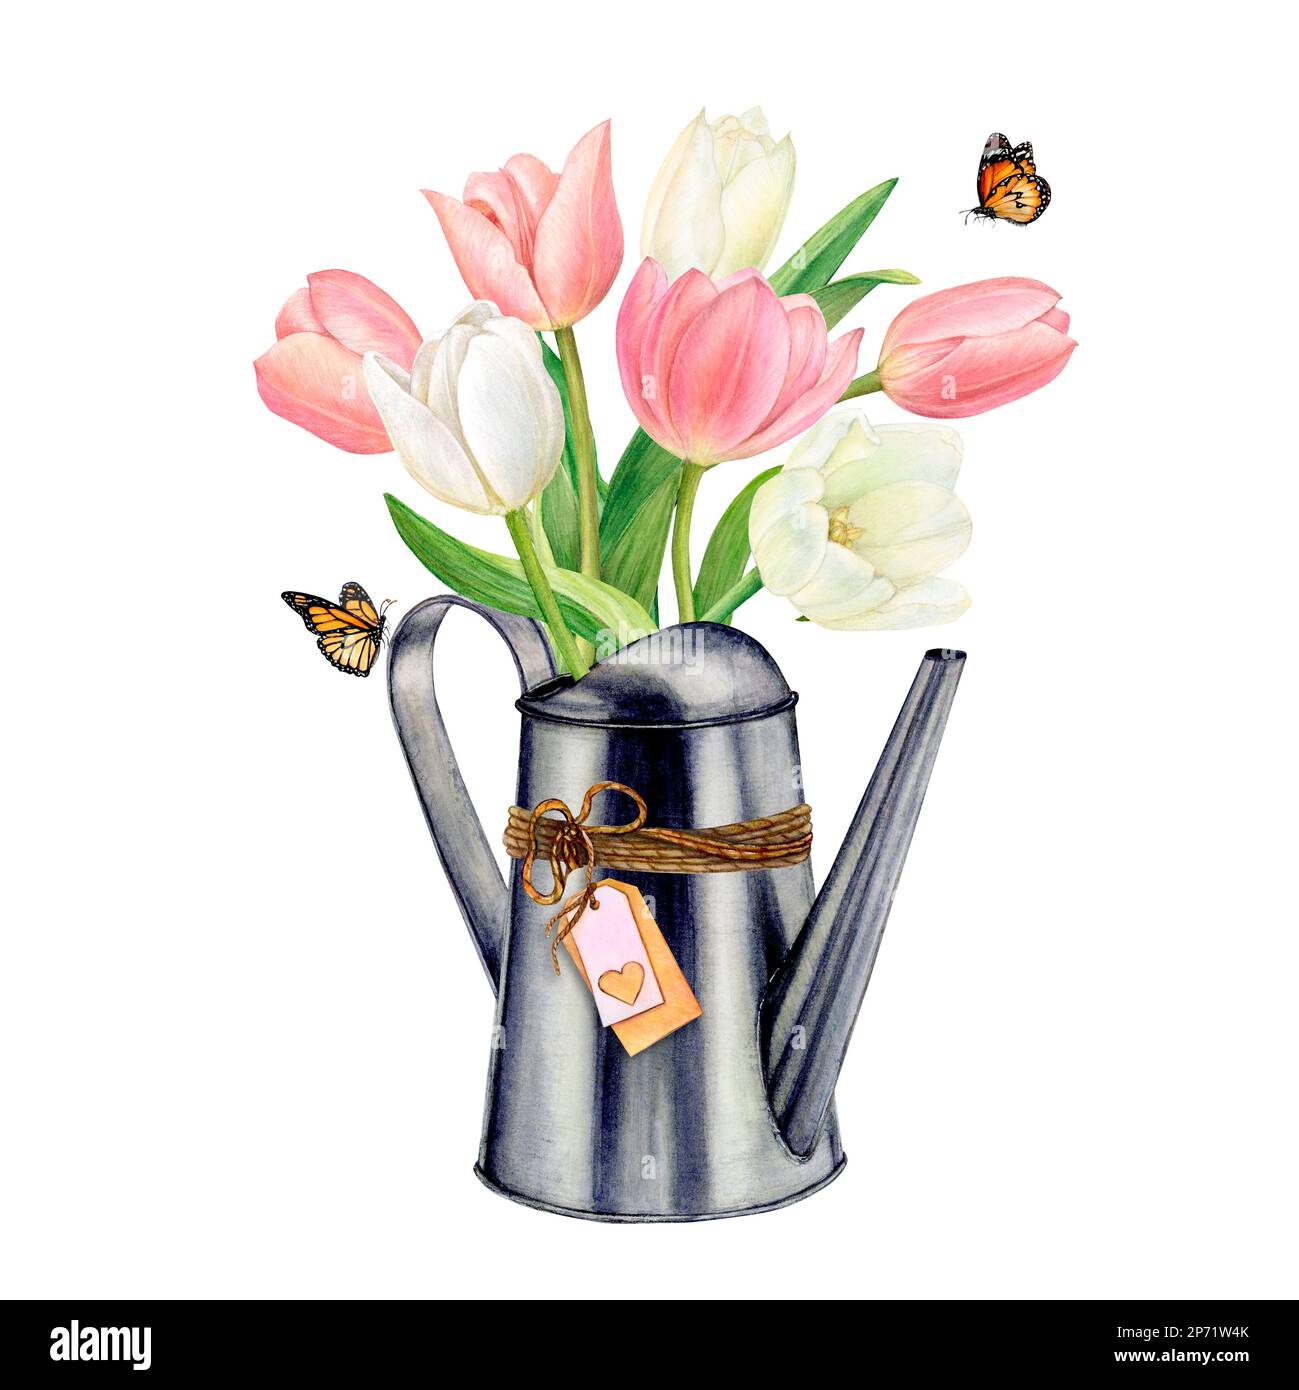 Watercolor illustration of rich bouquet of pink and white tulips in a watering can. There are two butterflies on the can and near it.  Stock Photo